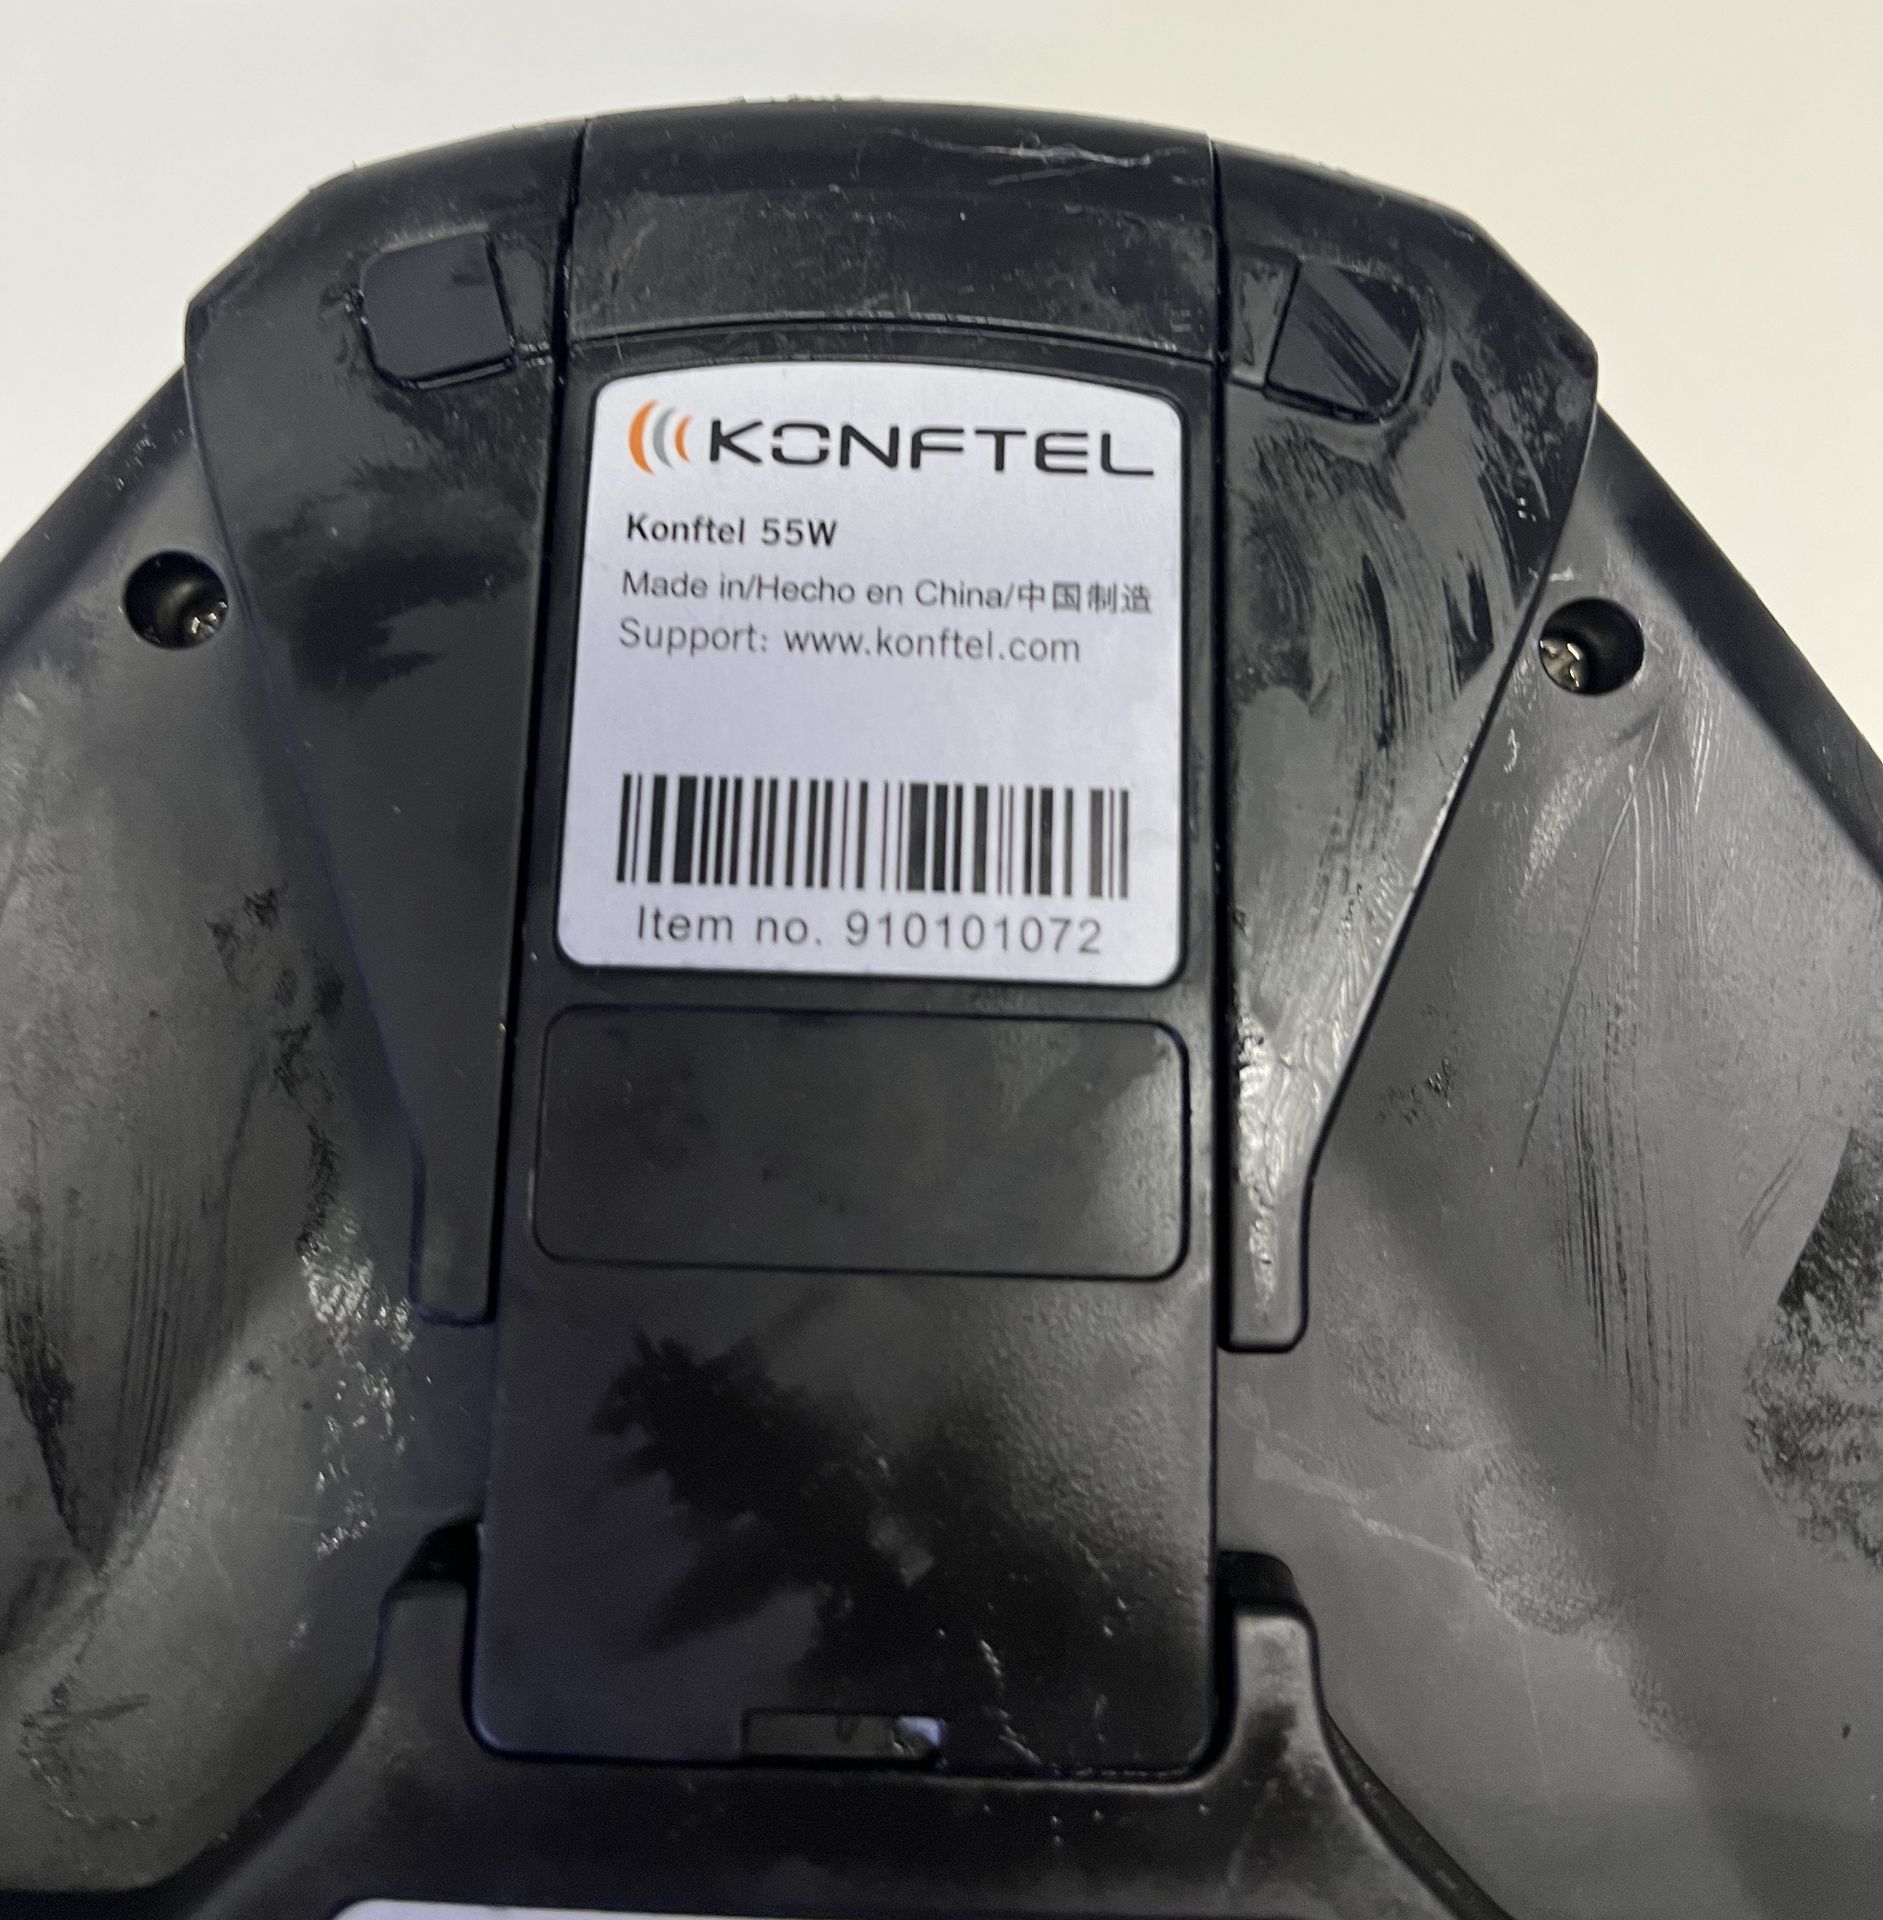 Konftel 55w Conference Phone with Cables - Used only once - Image 4 of 5